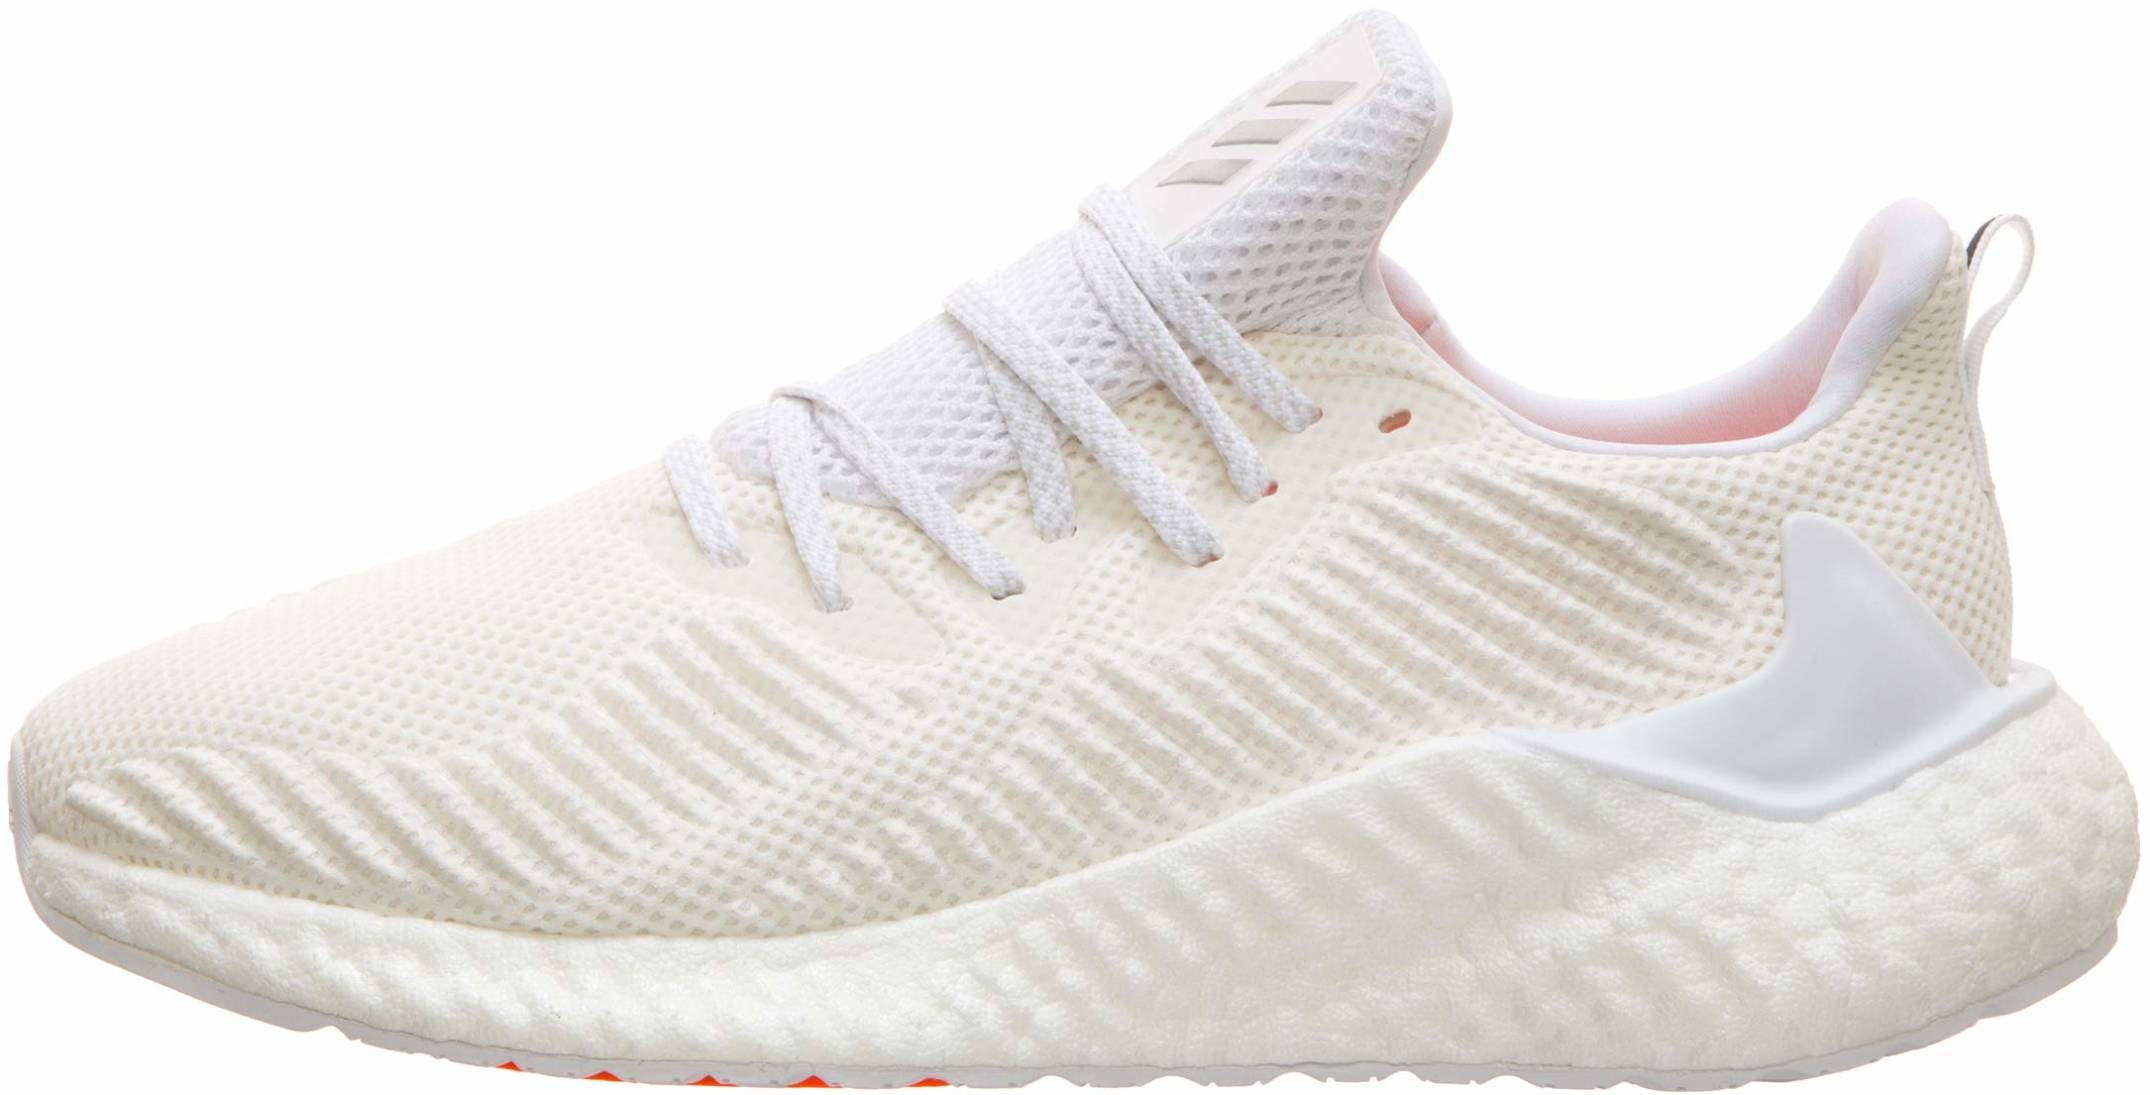 Save 50% on White Adidas Running Shoes 